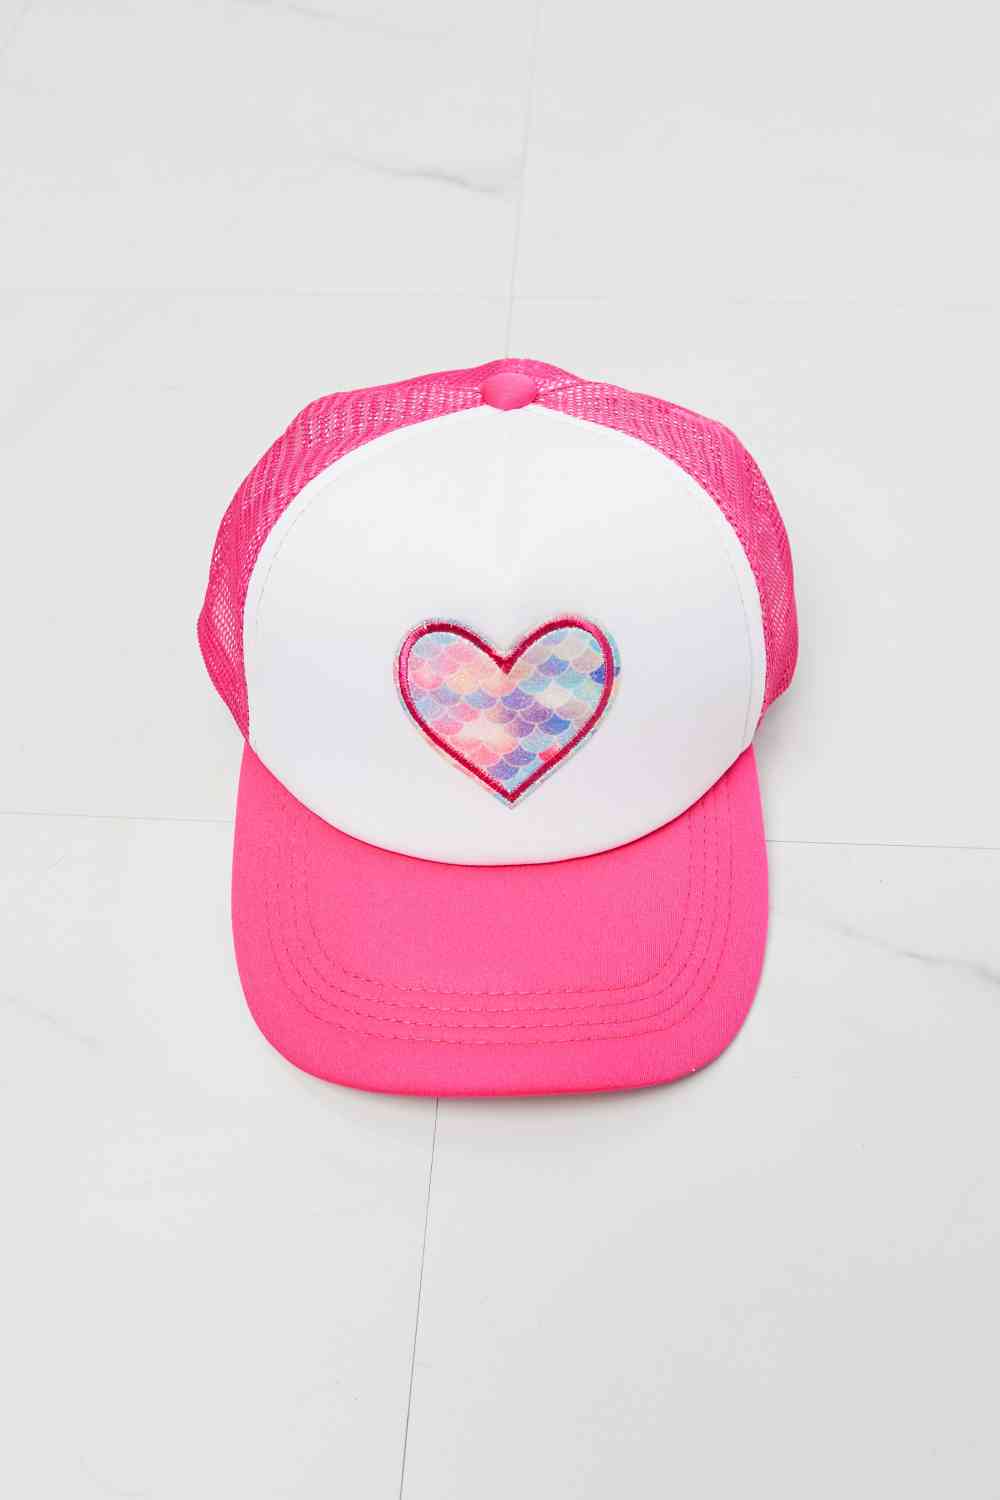 Fame Falling For You Trucker Hat in Pink Print on any thing USA/STOD clothes